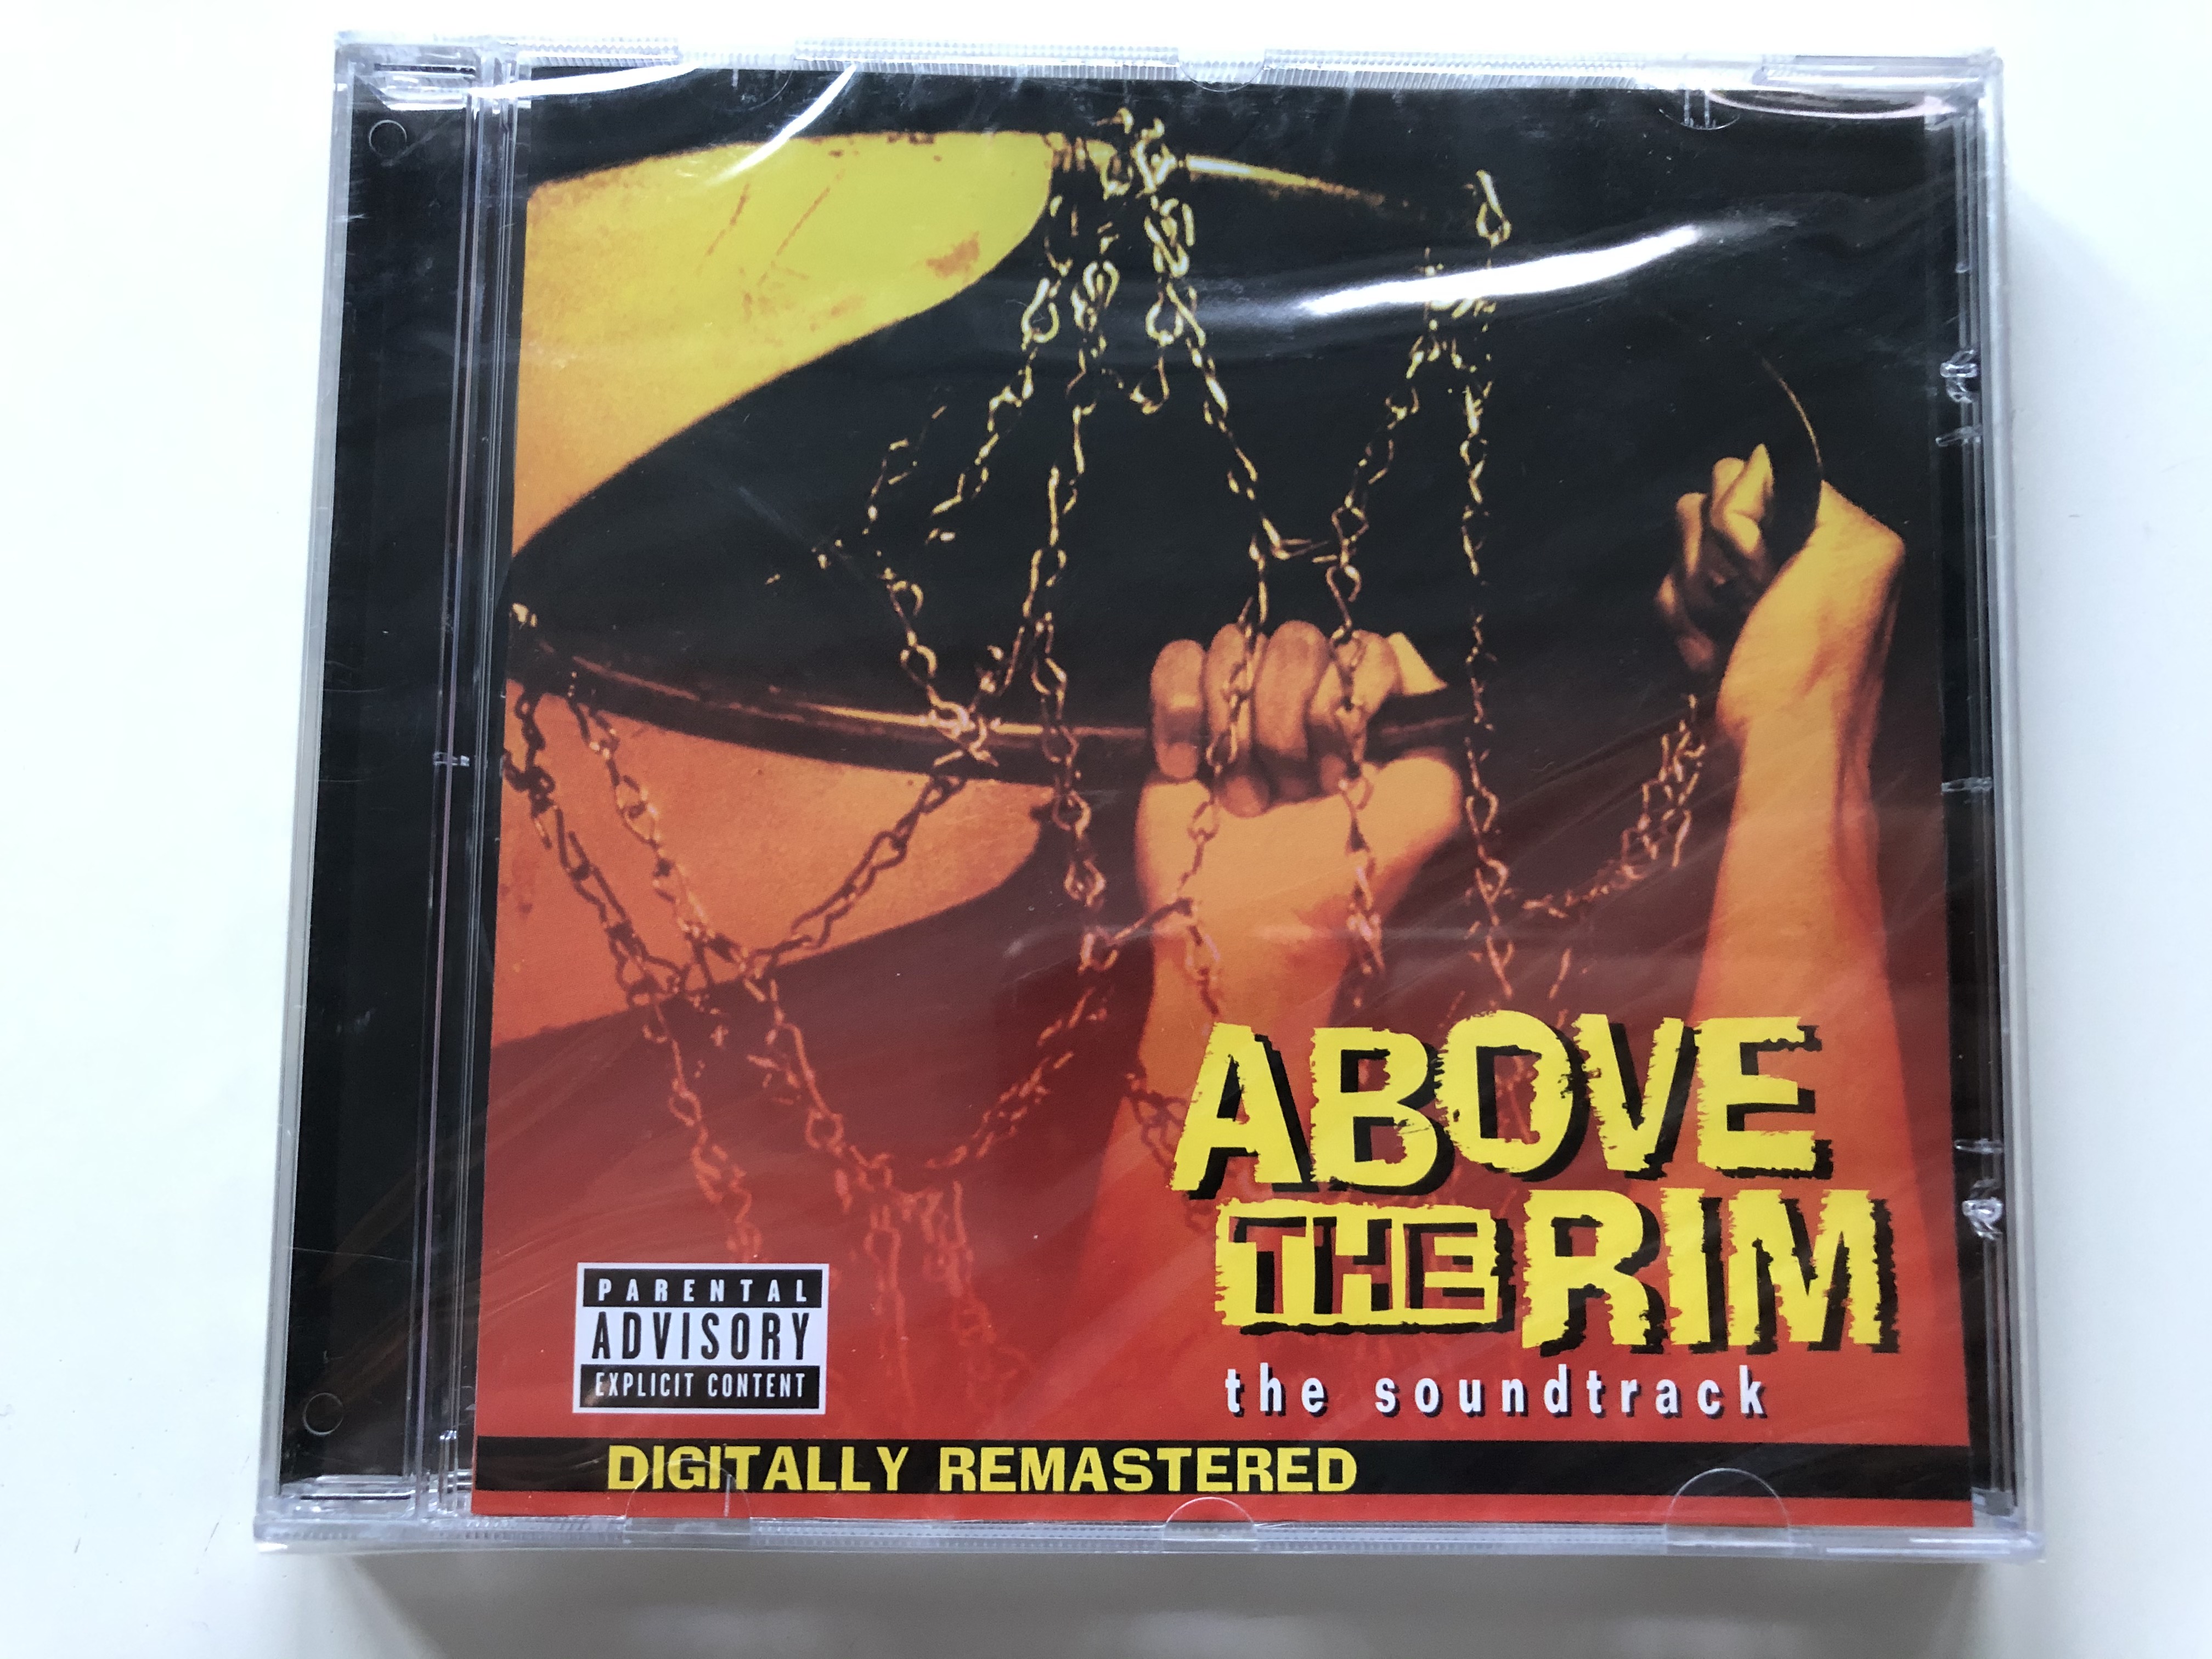 above-the-rim-the-soundtrack-digitally-remastered-ron-winter-productions-audio-cd-2001-pdr1006-1-.jpg